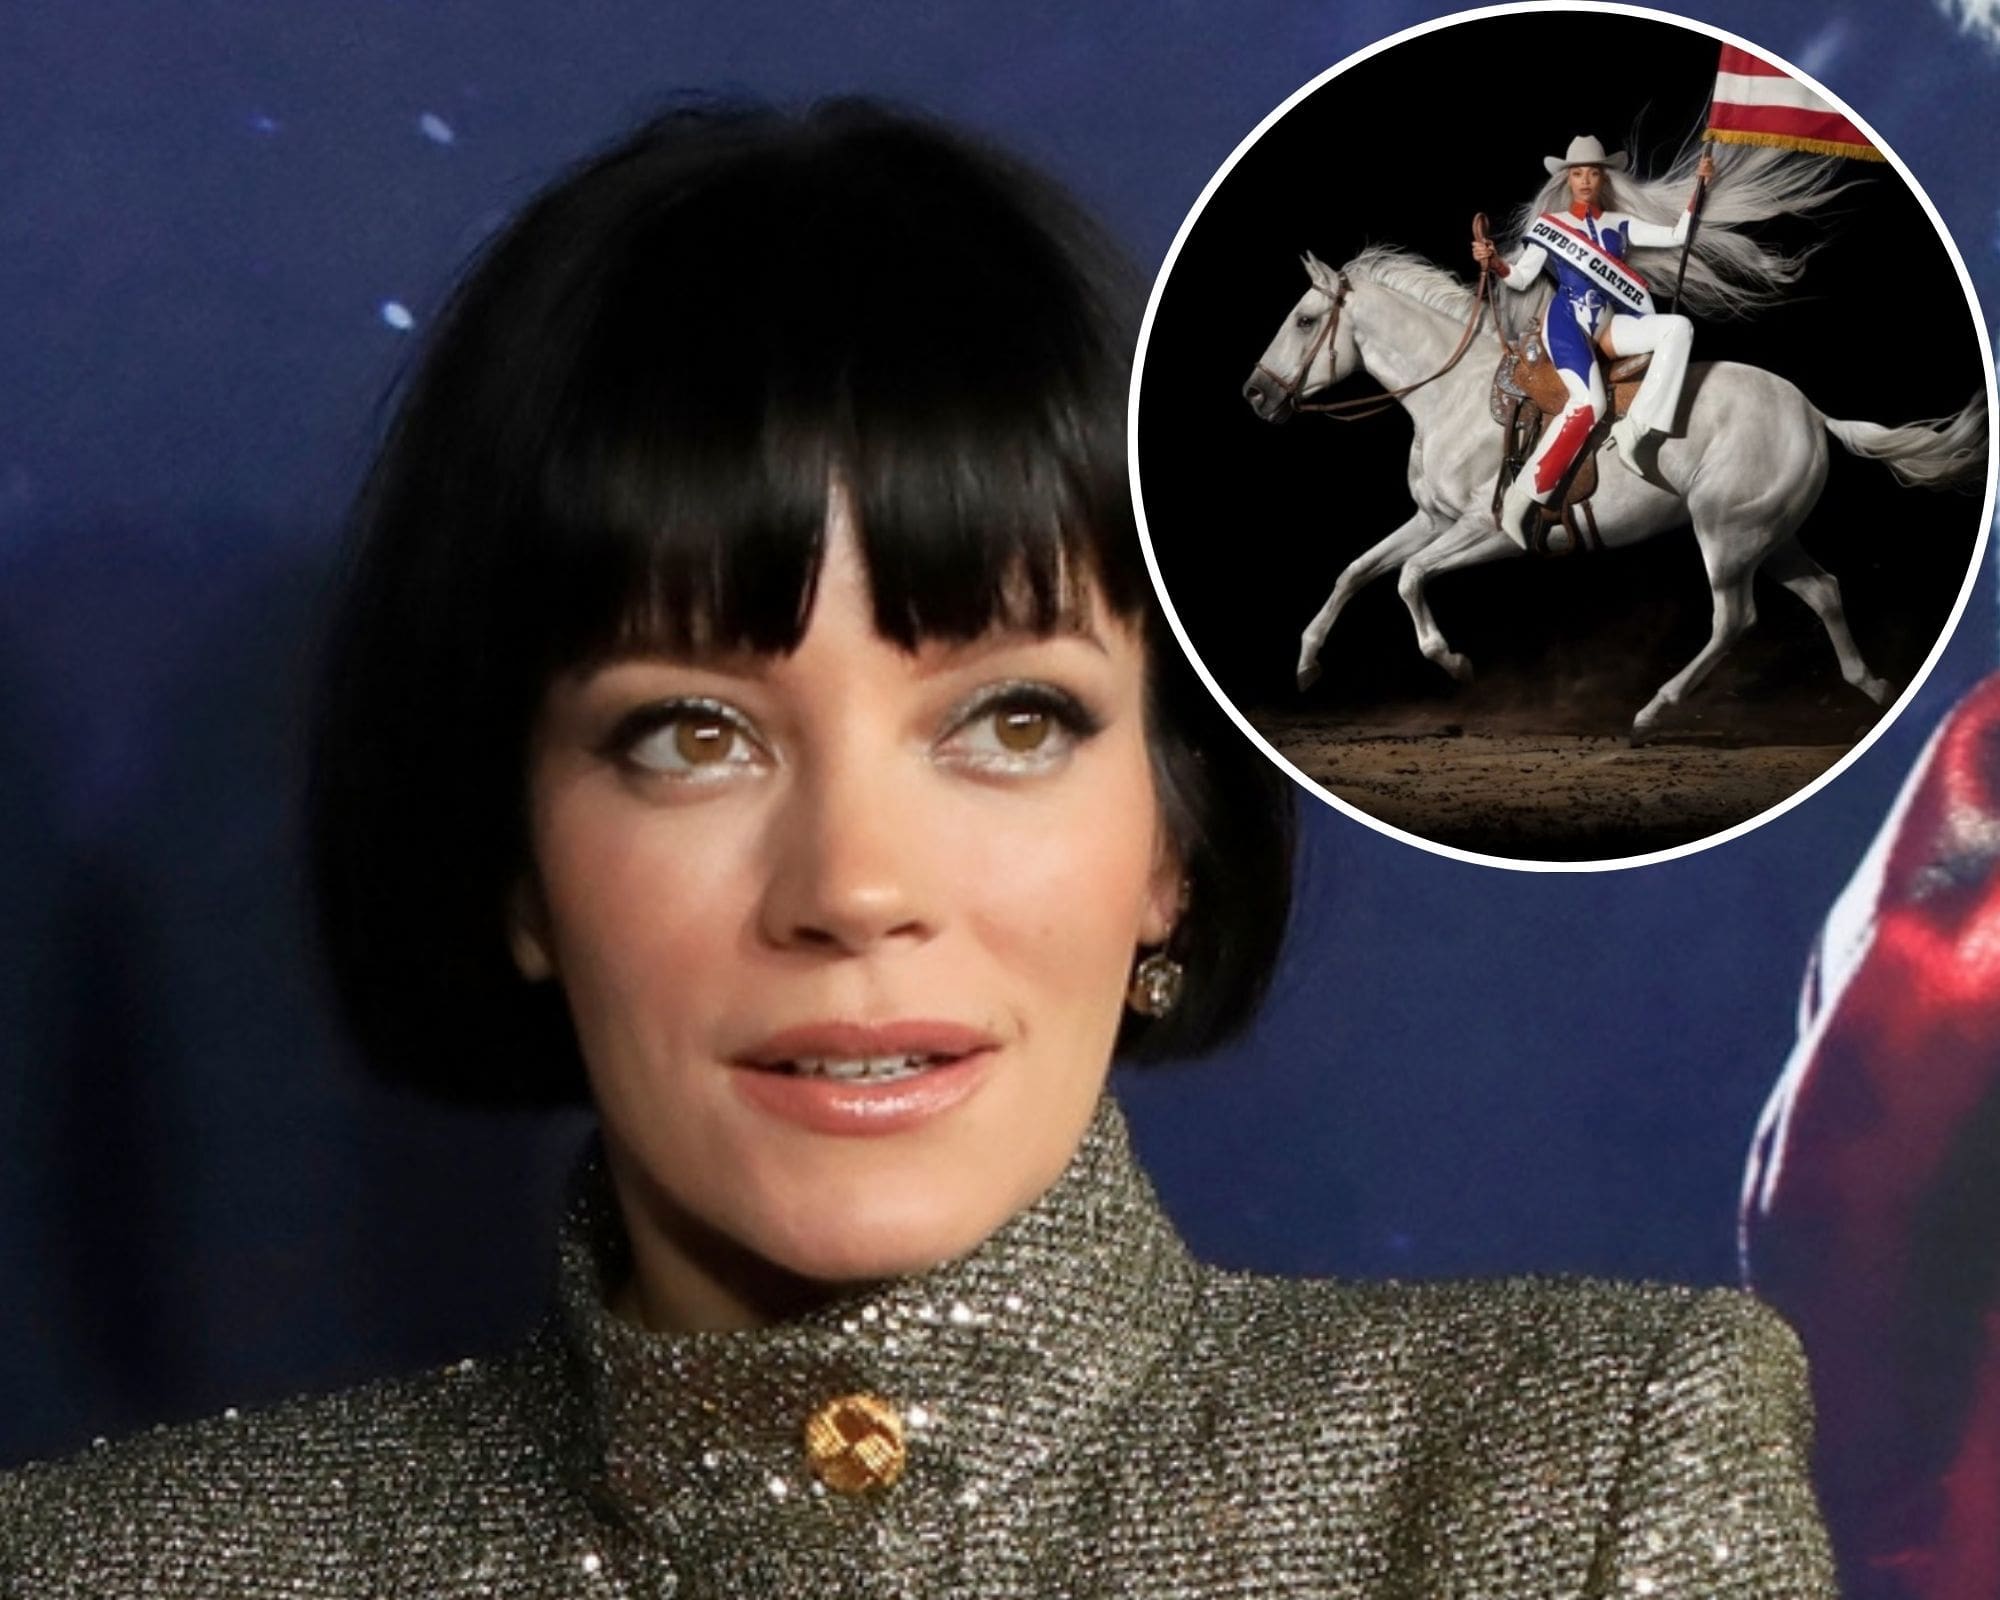 Lilly Allen Blasts Beyonce’s Country Album, Calls it ‘Calculated’ and ‘Weird’